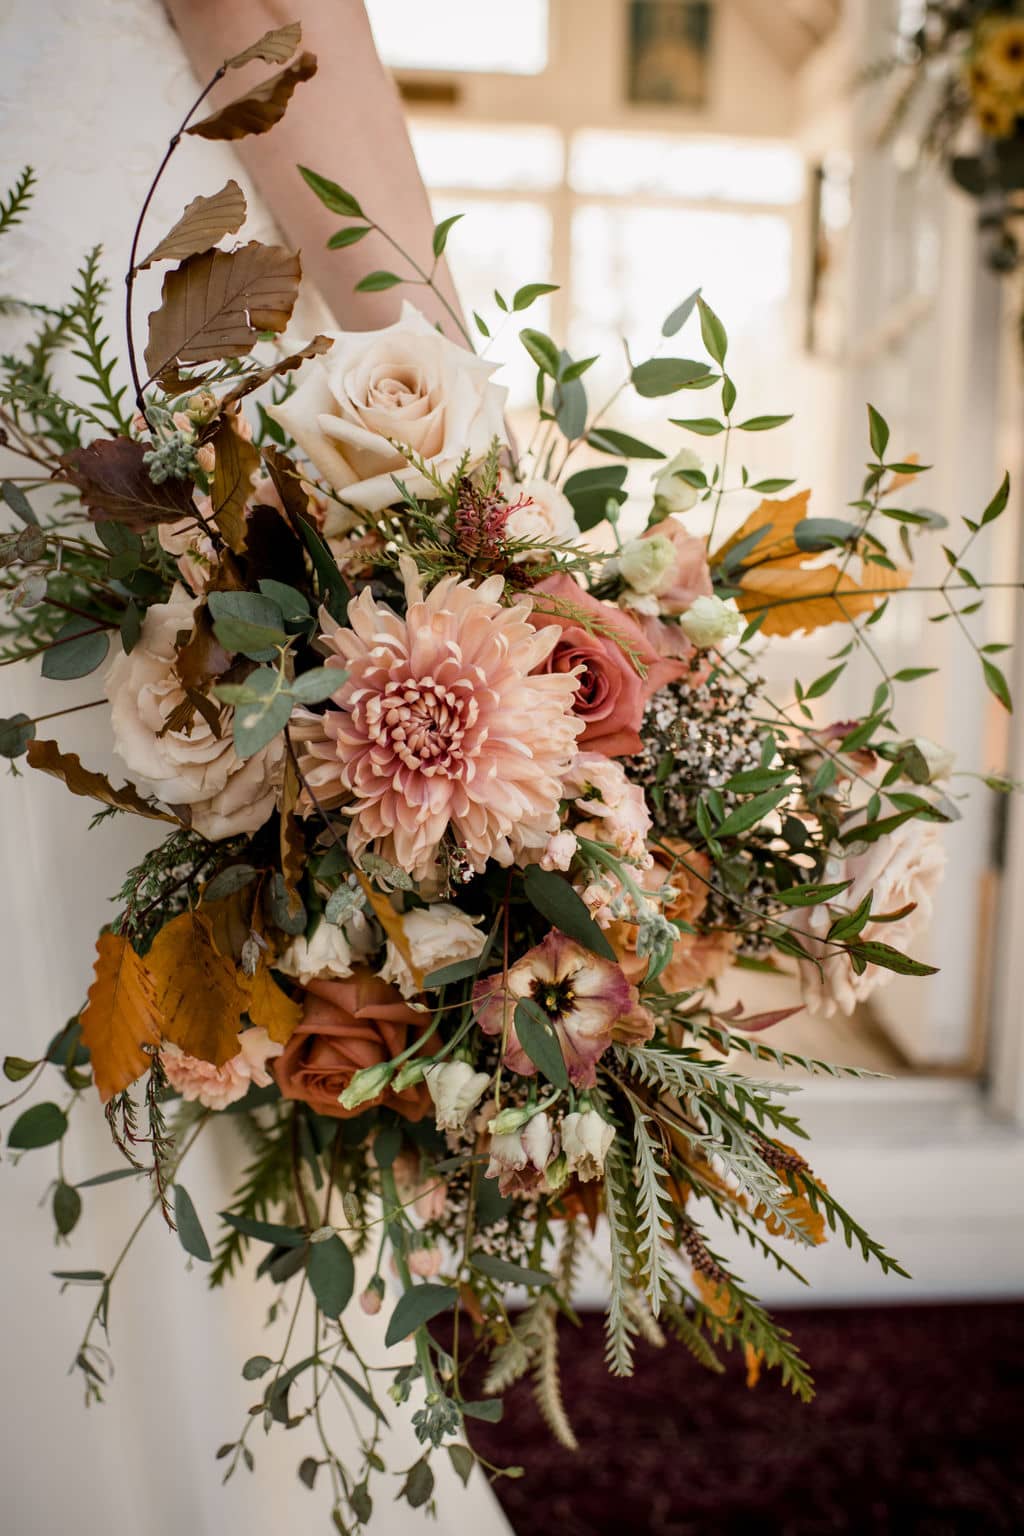 in learning how to plan a wedding in bryan college station, the bride opted for a bouquet of mixed flowers